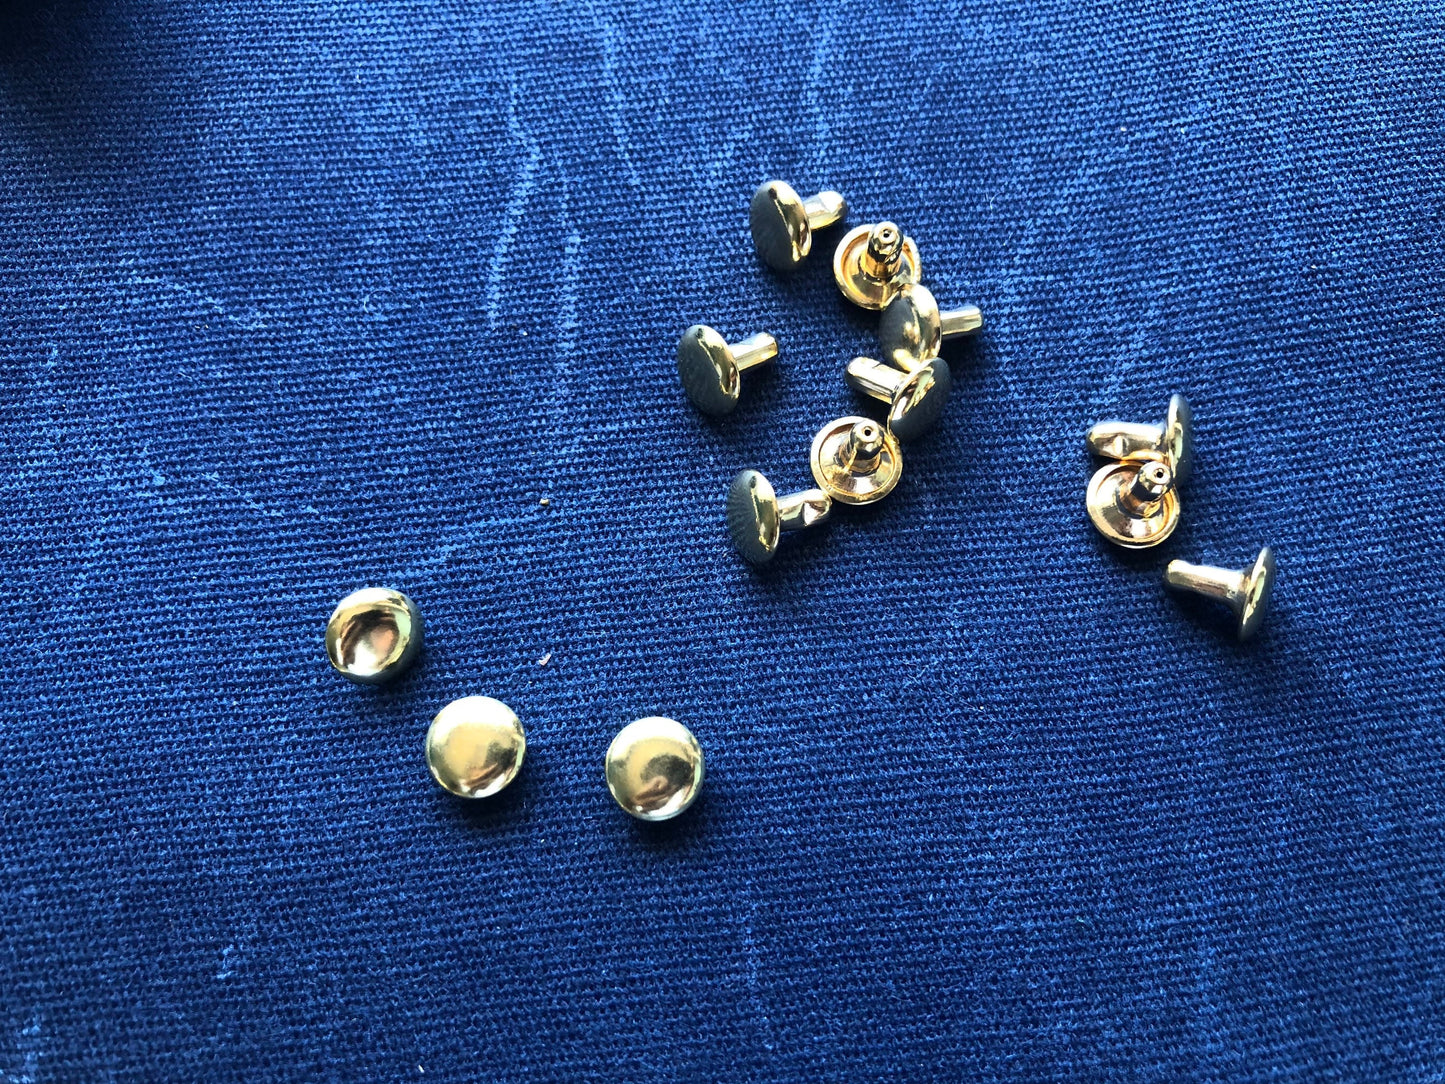 100 sets of double caps rivets, gun metal black, silver, gold rivets for bags, jackets, leather work